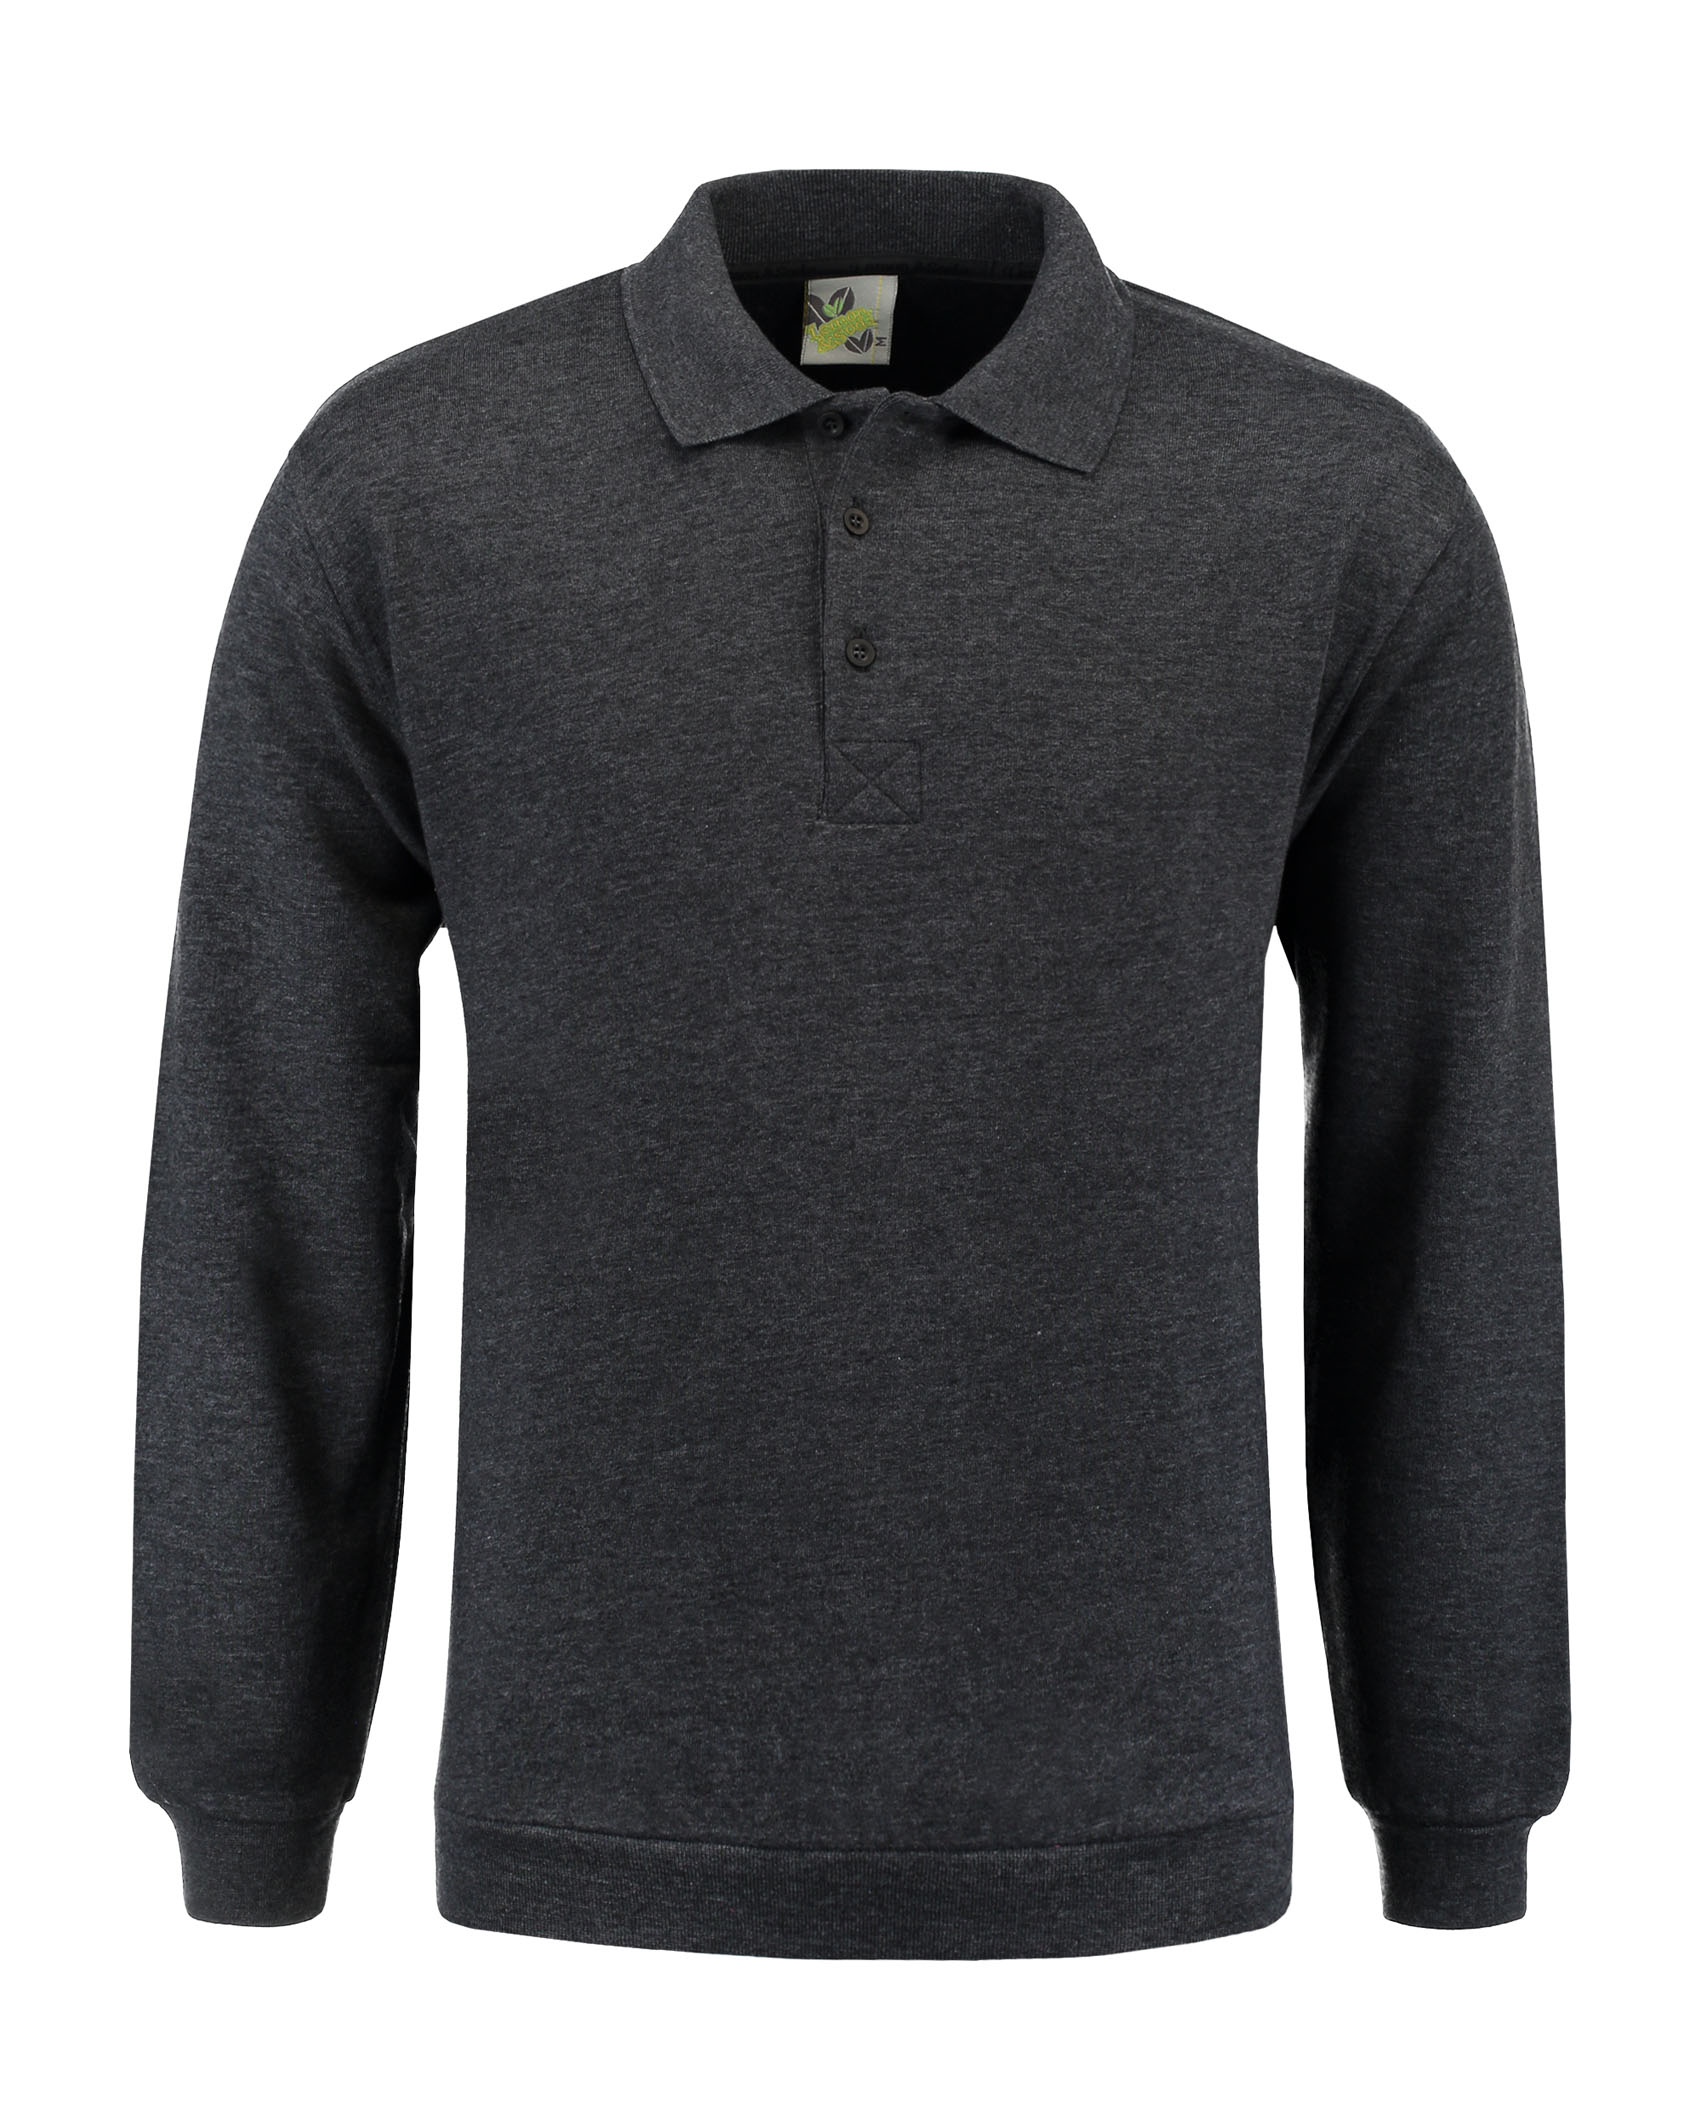 L&S Polosweater for him